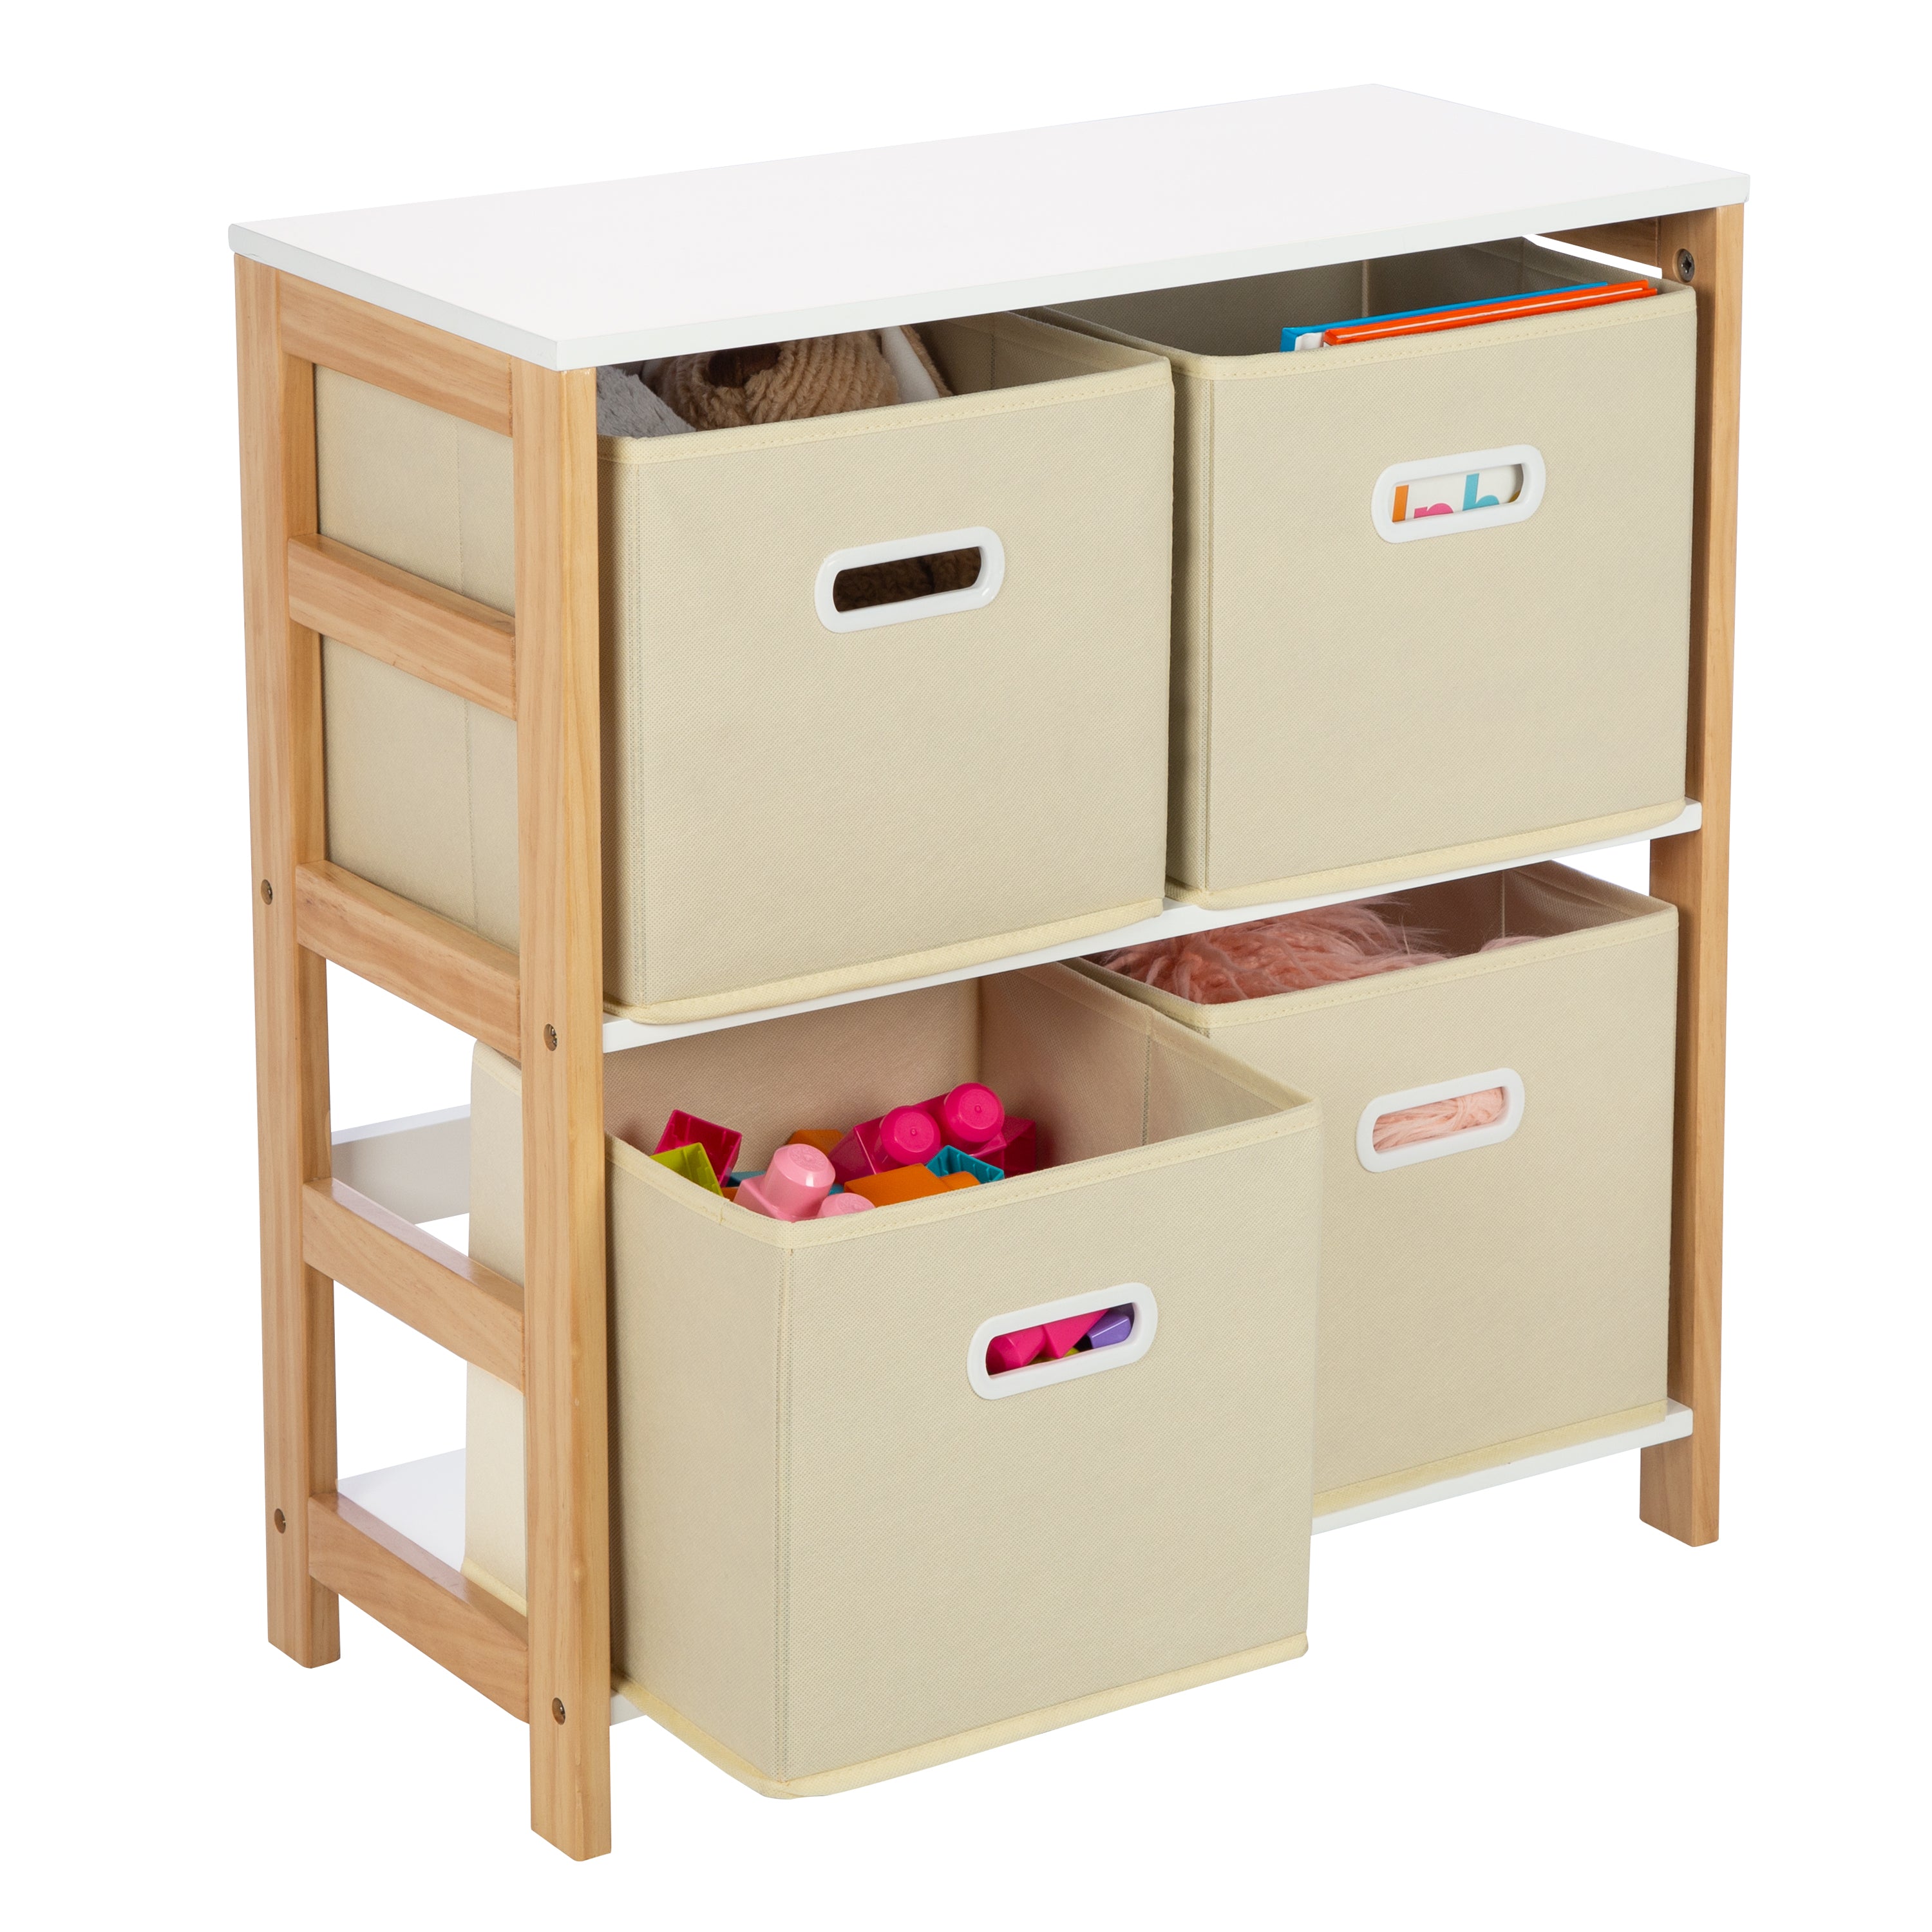 Honey-Can-Do Organizer Review: Great Storage for Kids' Craft Supplies